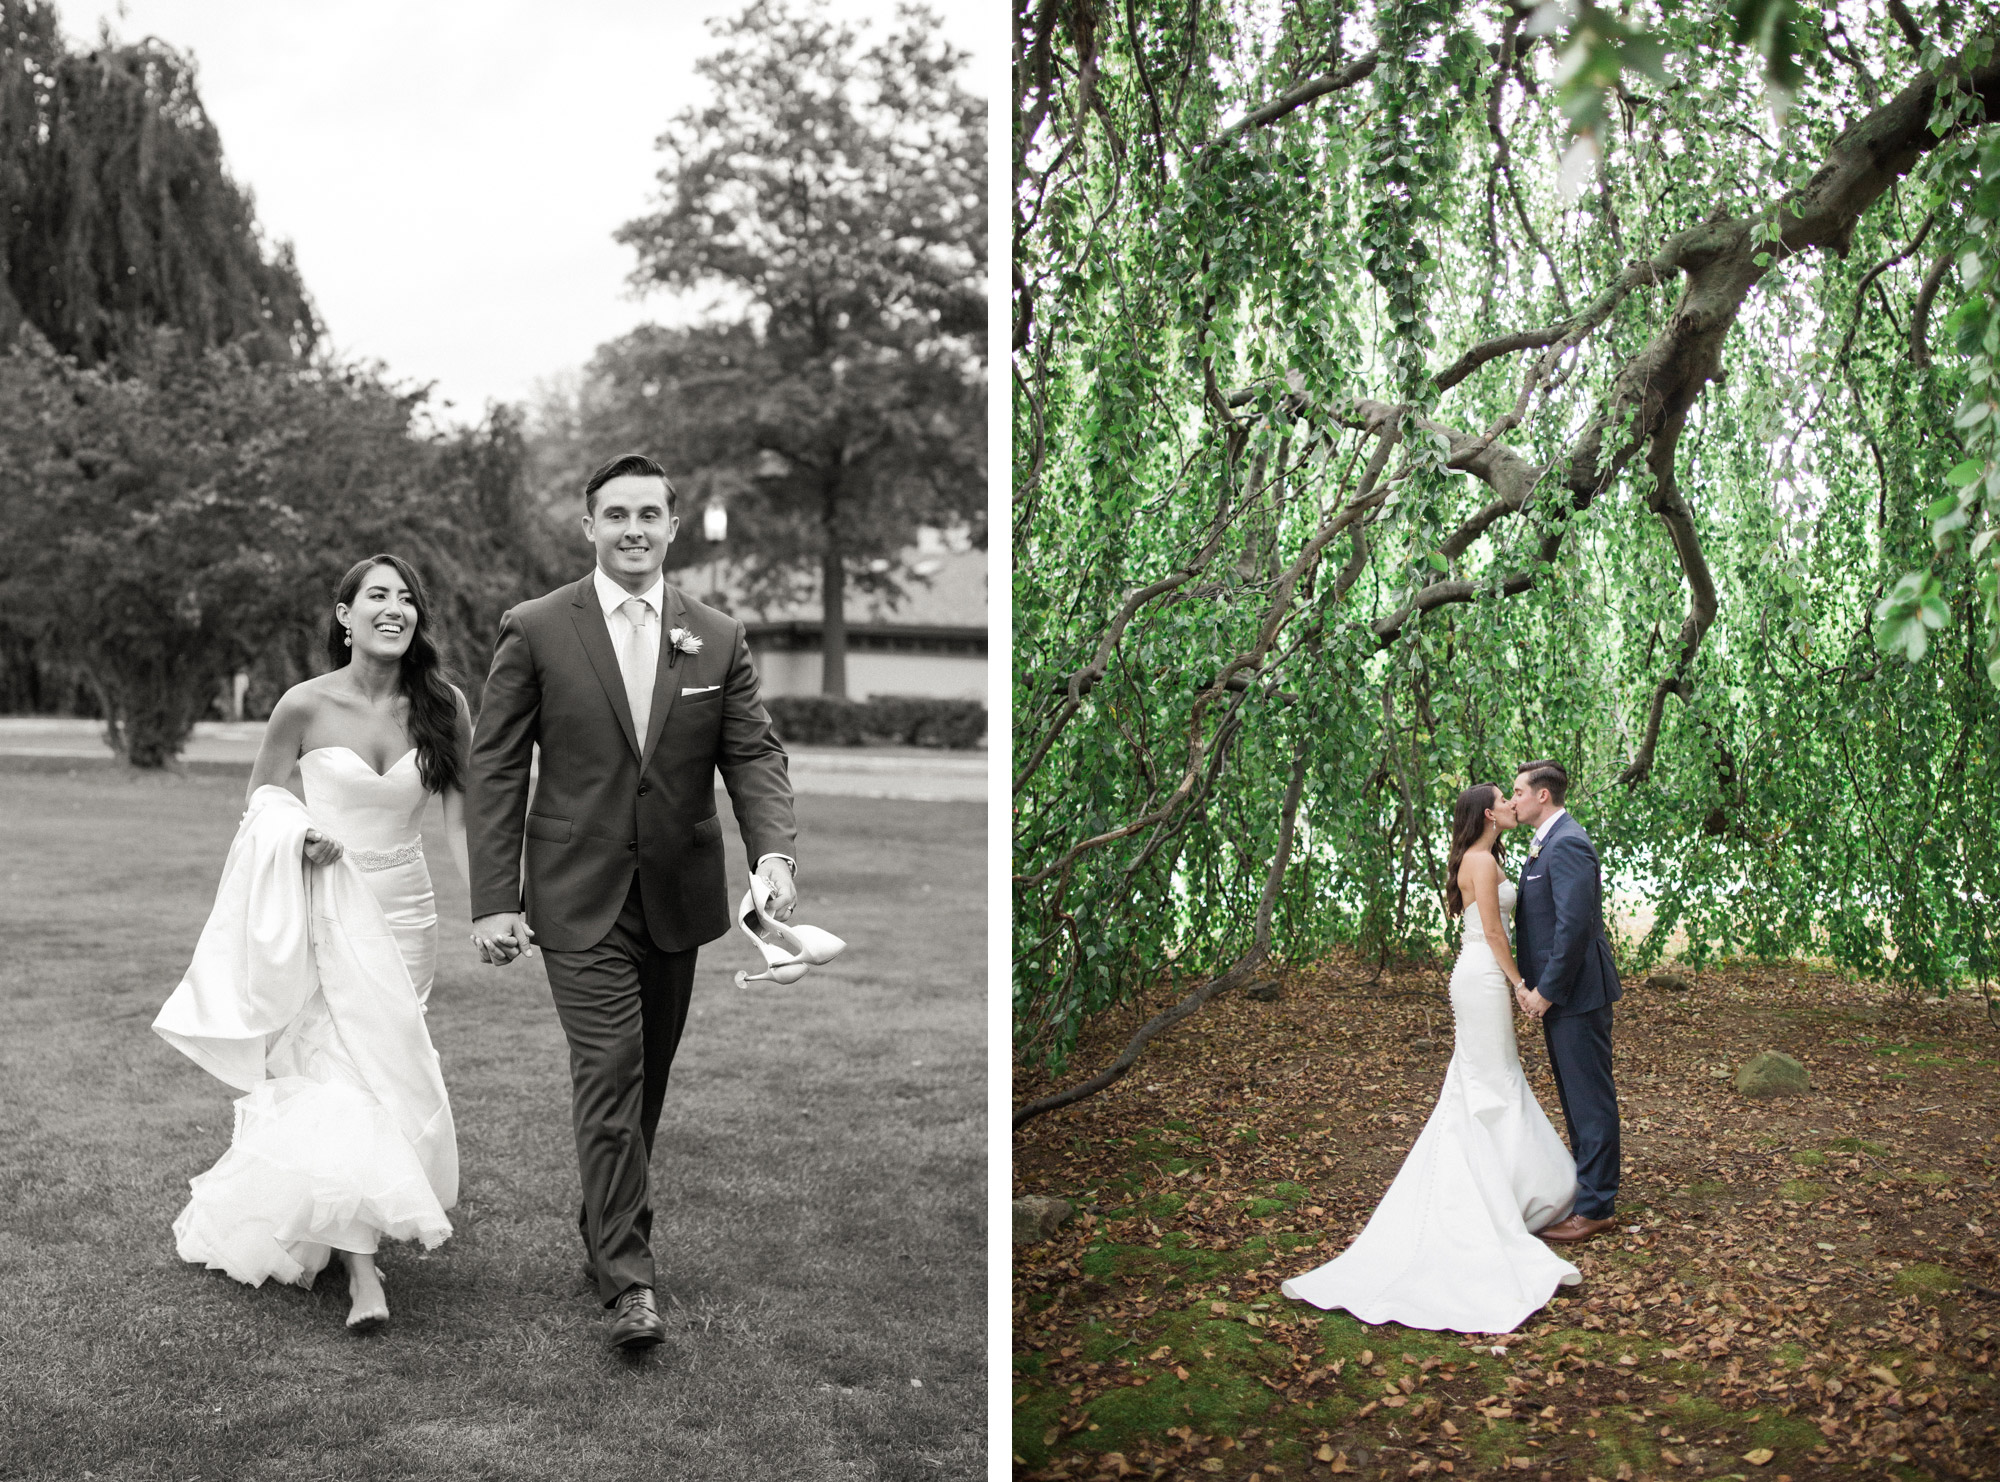 Wedding at Whitby Castle.  Photos by Kelly Kollar Photography.